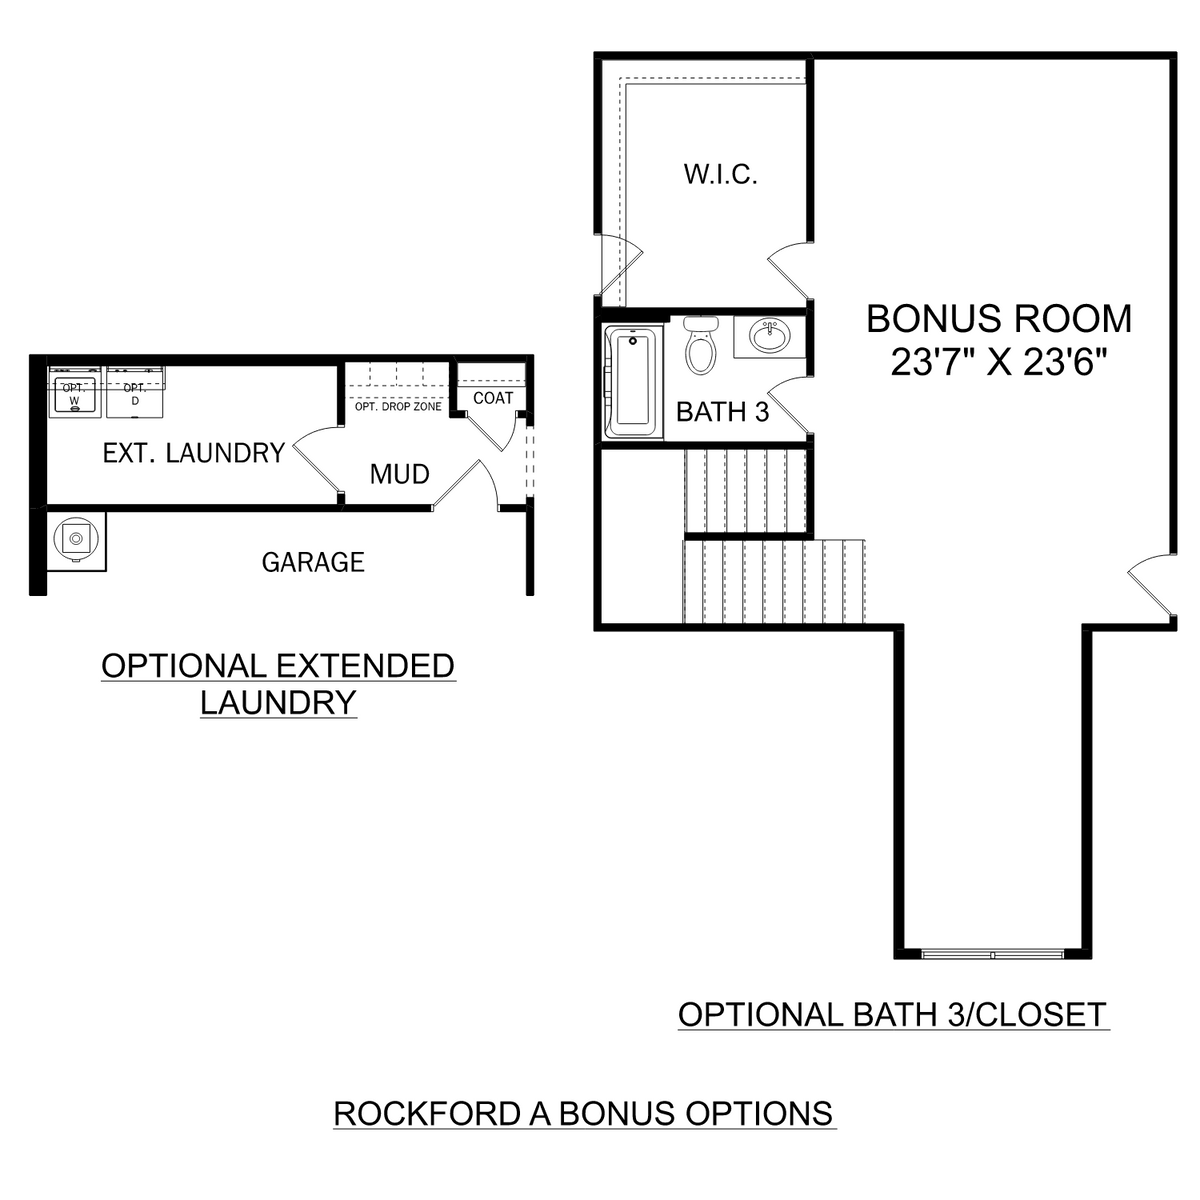 3 - The Rockford with Bonus buildable floor plan layout in Davidson Homes' Pikes Ridge community.